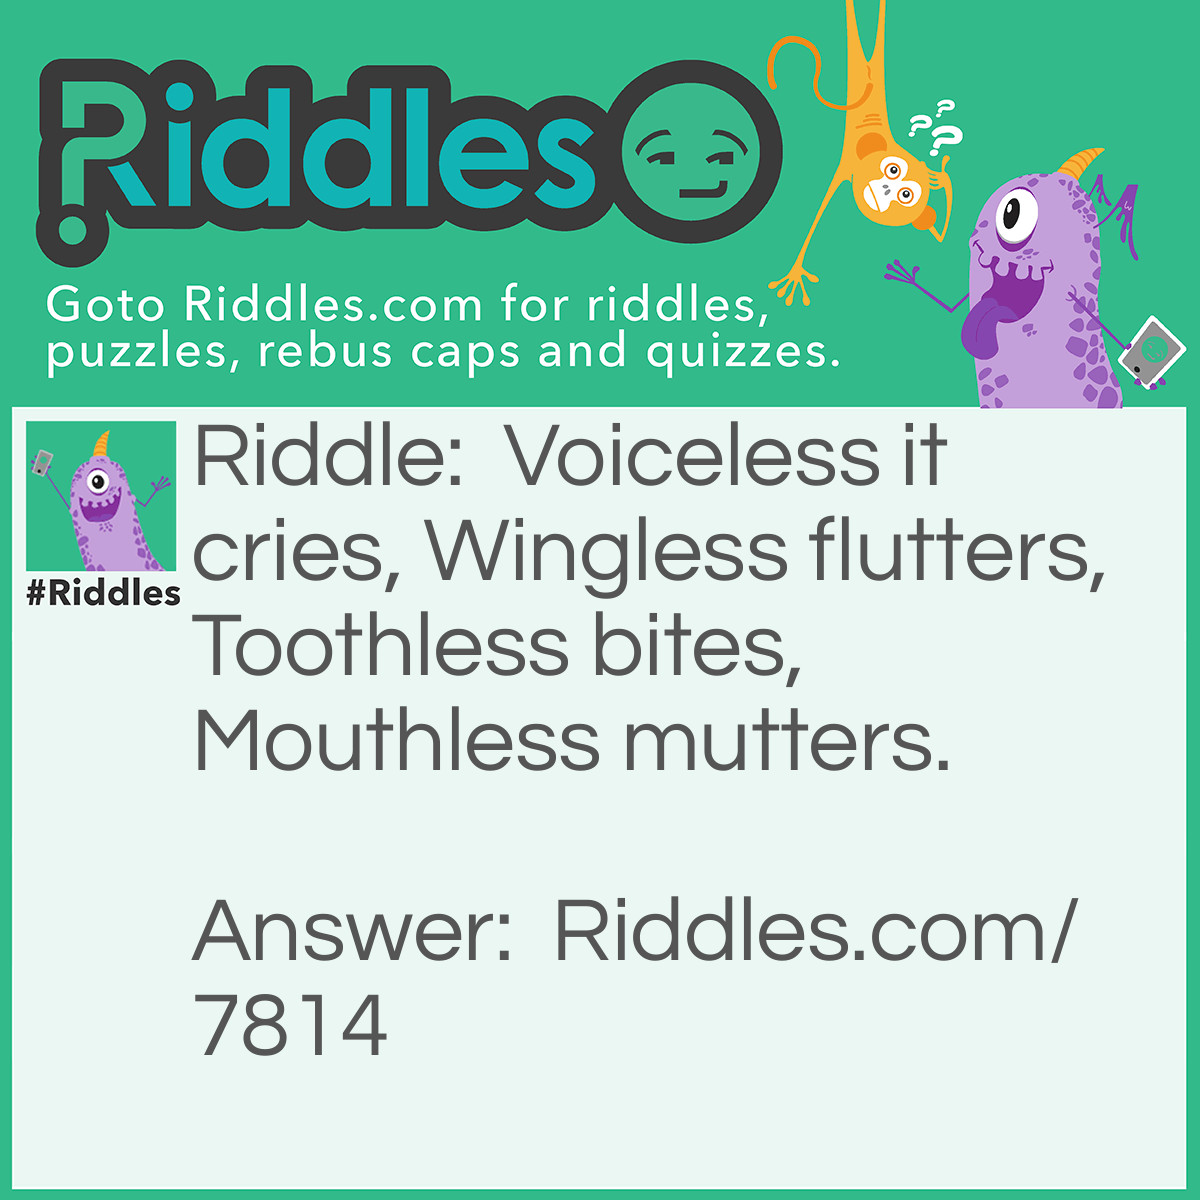 Riddle: Voiceless it cries, Wingless flutters, Toothless bites, Mouthless mutters. What is it? Answer: Wind